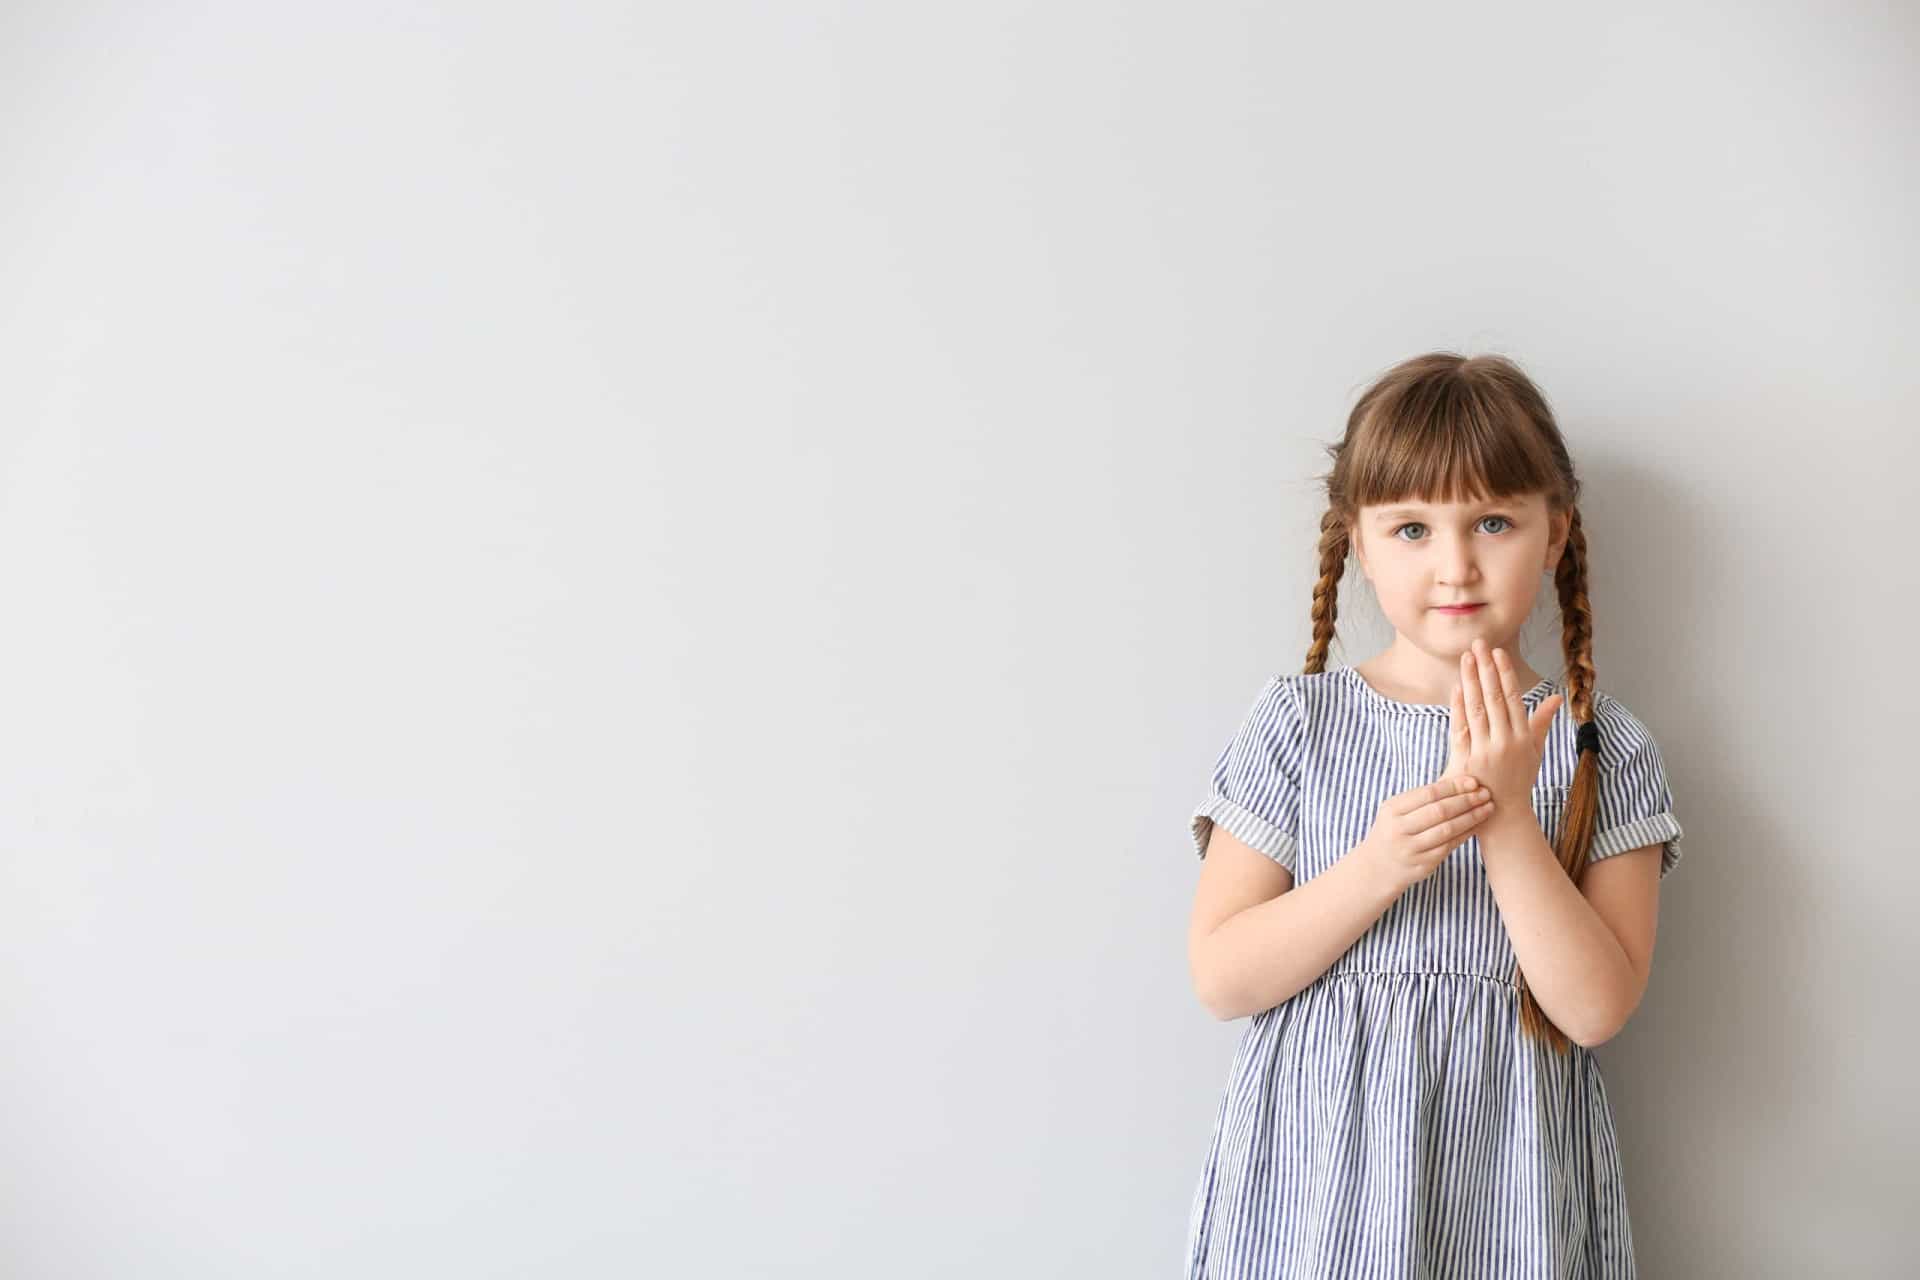 <p>Selective mutism is best described as an <a href="https://www.starsinsider.com/lifestyle/500234/how-to-beat-eco-anxiety" rel="noopener">anxiety</a> disorder that causes a normally verbal person to be unable to speak when exposed to certain situations. While it is estimated to affect around one in 140 young children, awareness about selective mutism is relatively low. That said, there are certain misconceptions about the condition that have to be dispelled.</p><p>Check out this gallery to learn about selective mutism and what can be done about it.</p><p>You may also like:<a href="https://www.starsinsider.com/n/159191?utm_source=msn.com&utm_medium=display&utm_campaign=referral_description&utm_content=521574en-us"> Rare medical conditions with extremely bizarre symptoms</a></p>